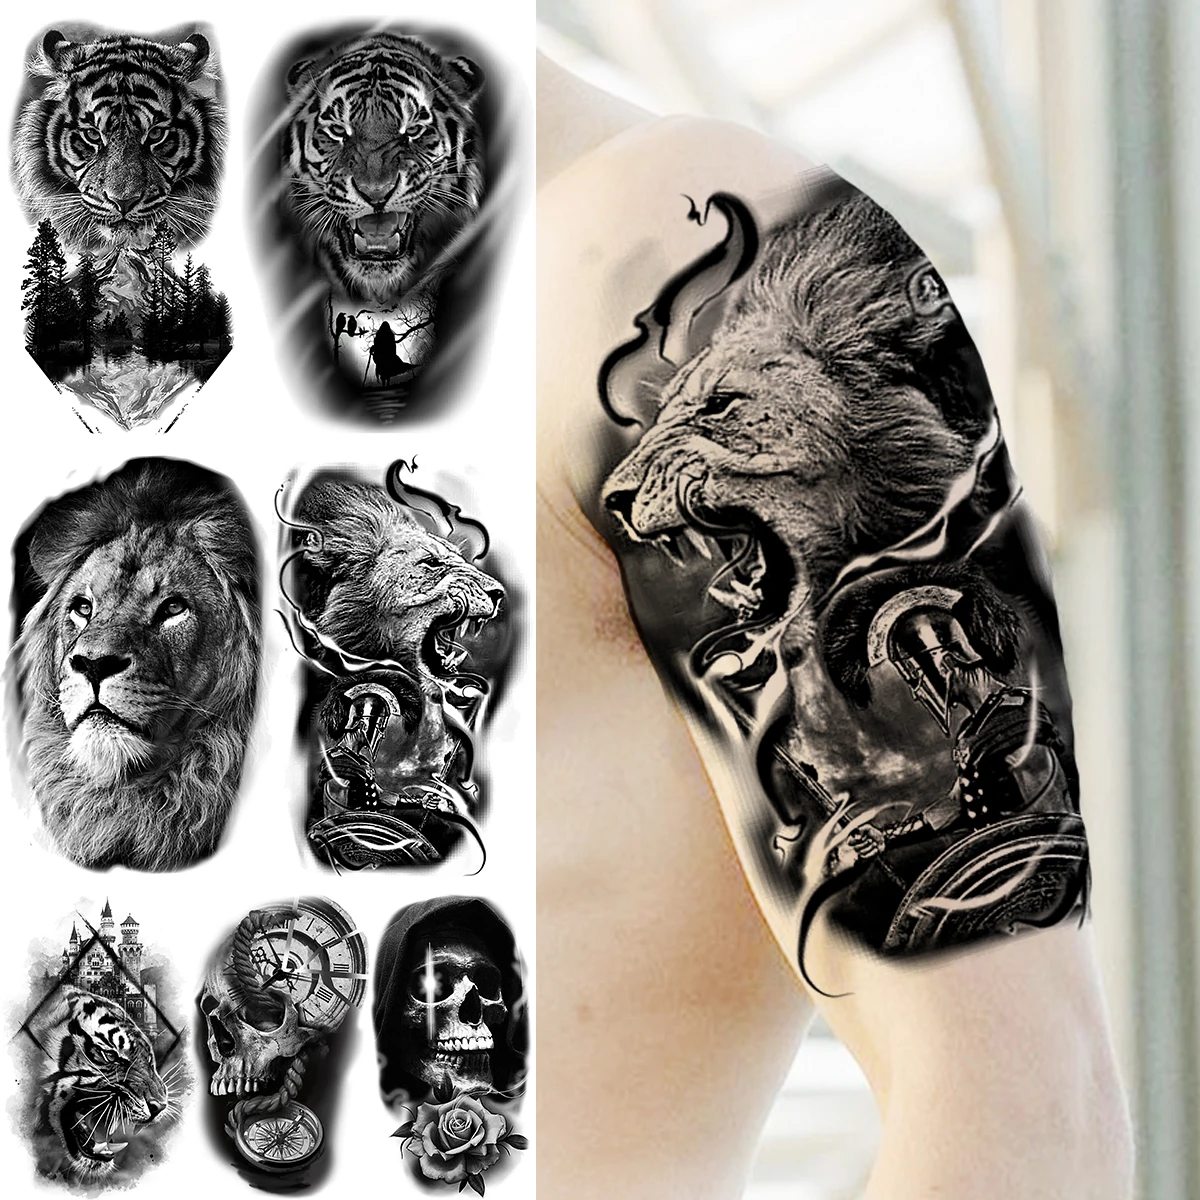 

Black Lion Knight Temporary Tattoos For Men Adults Realistic Tiger Skull Compass Rose Flower Fake Tattoo Sticker Arm Body Tatoos